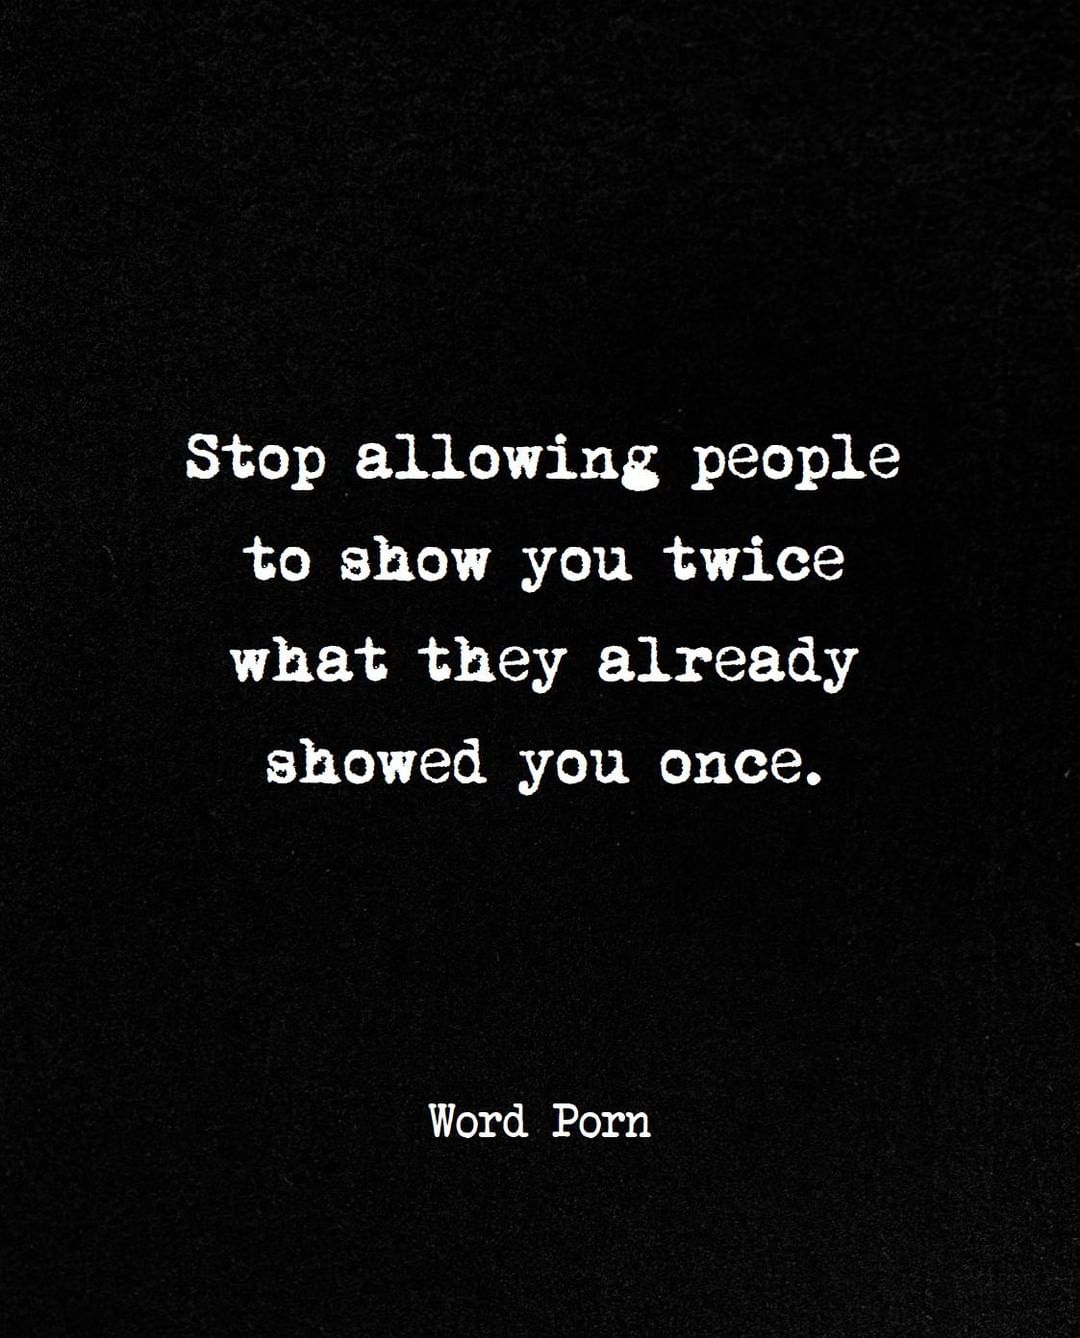 Stop allowing people to show you twice what they already showed you once.